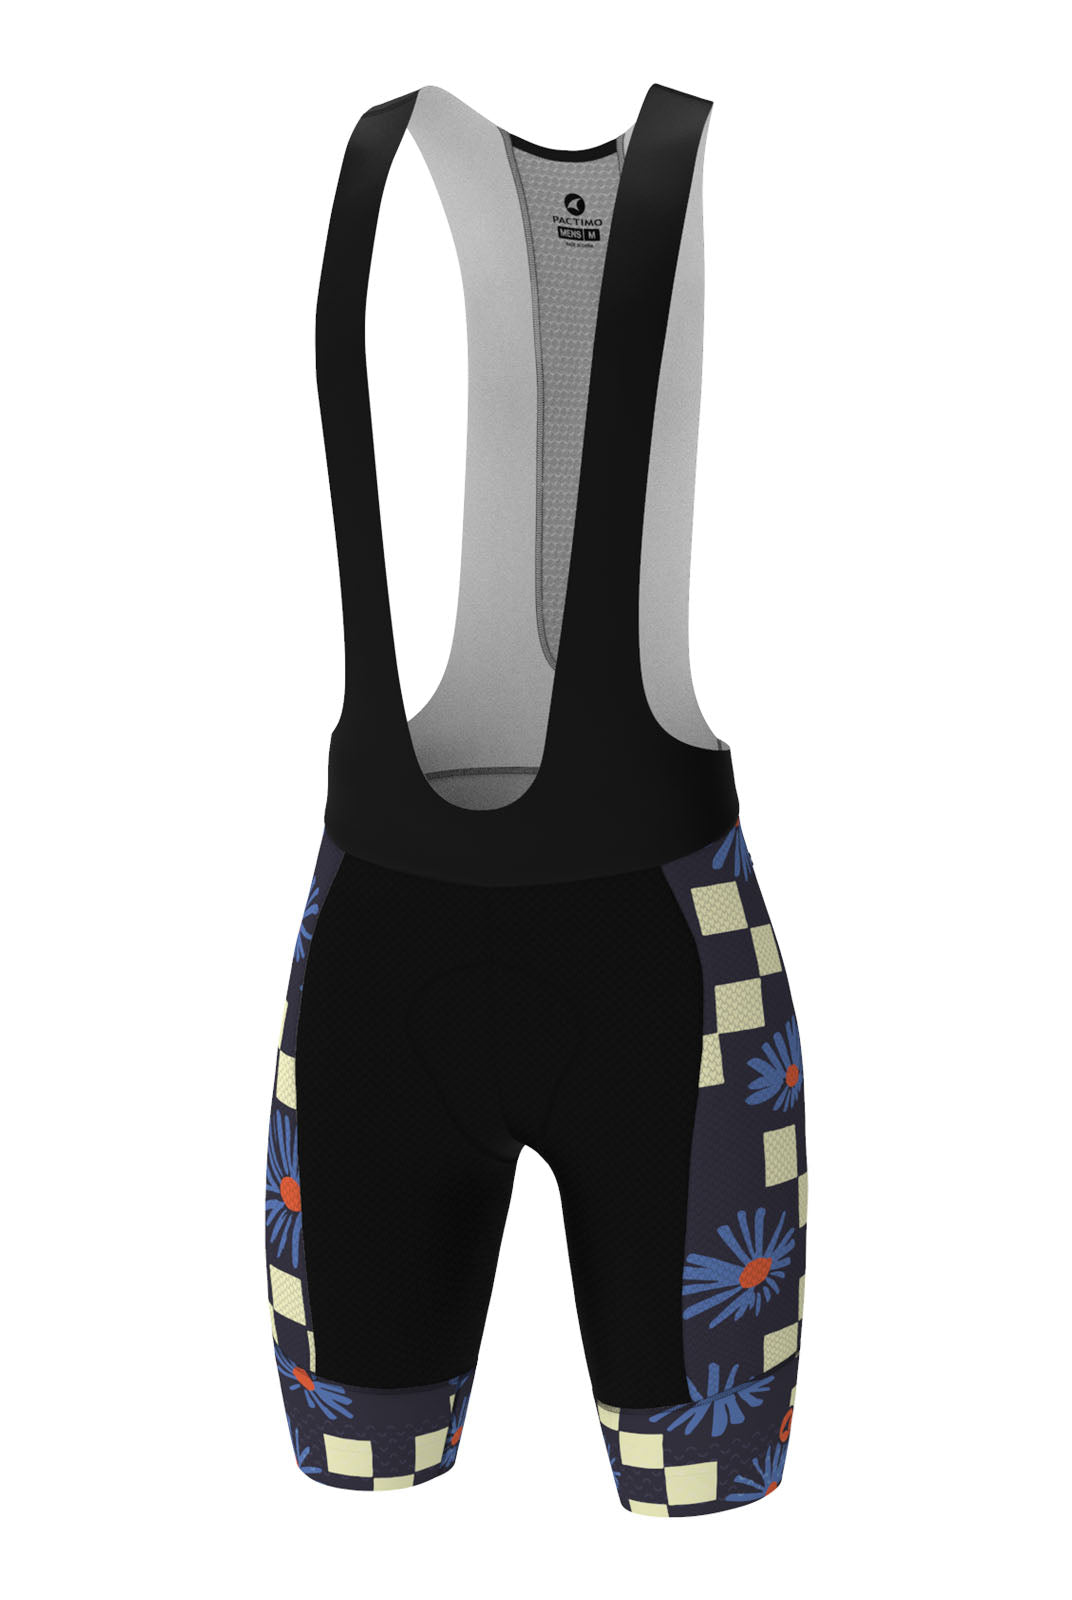 Men's Unique Long Length Cycling Bibs - Aster Checks Navy Front View